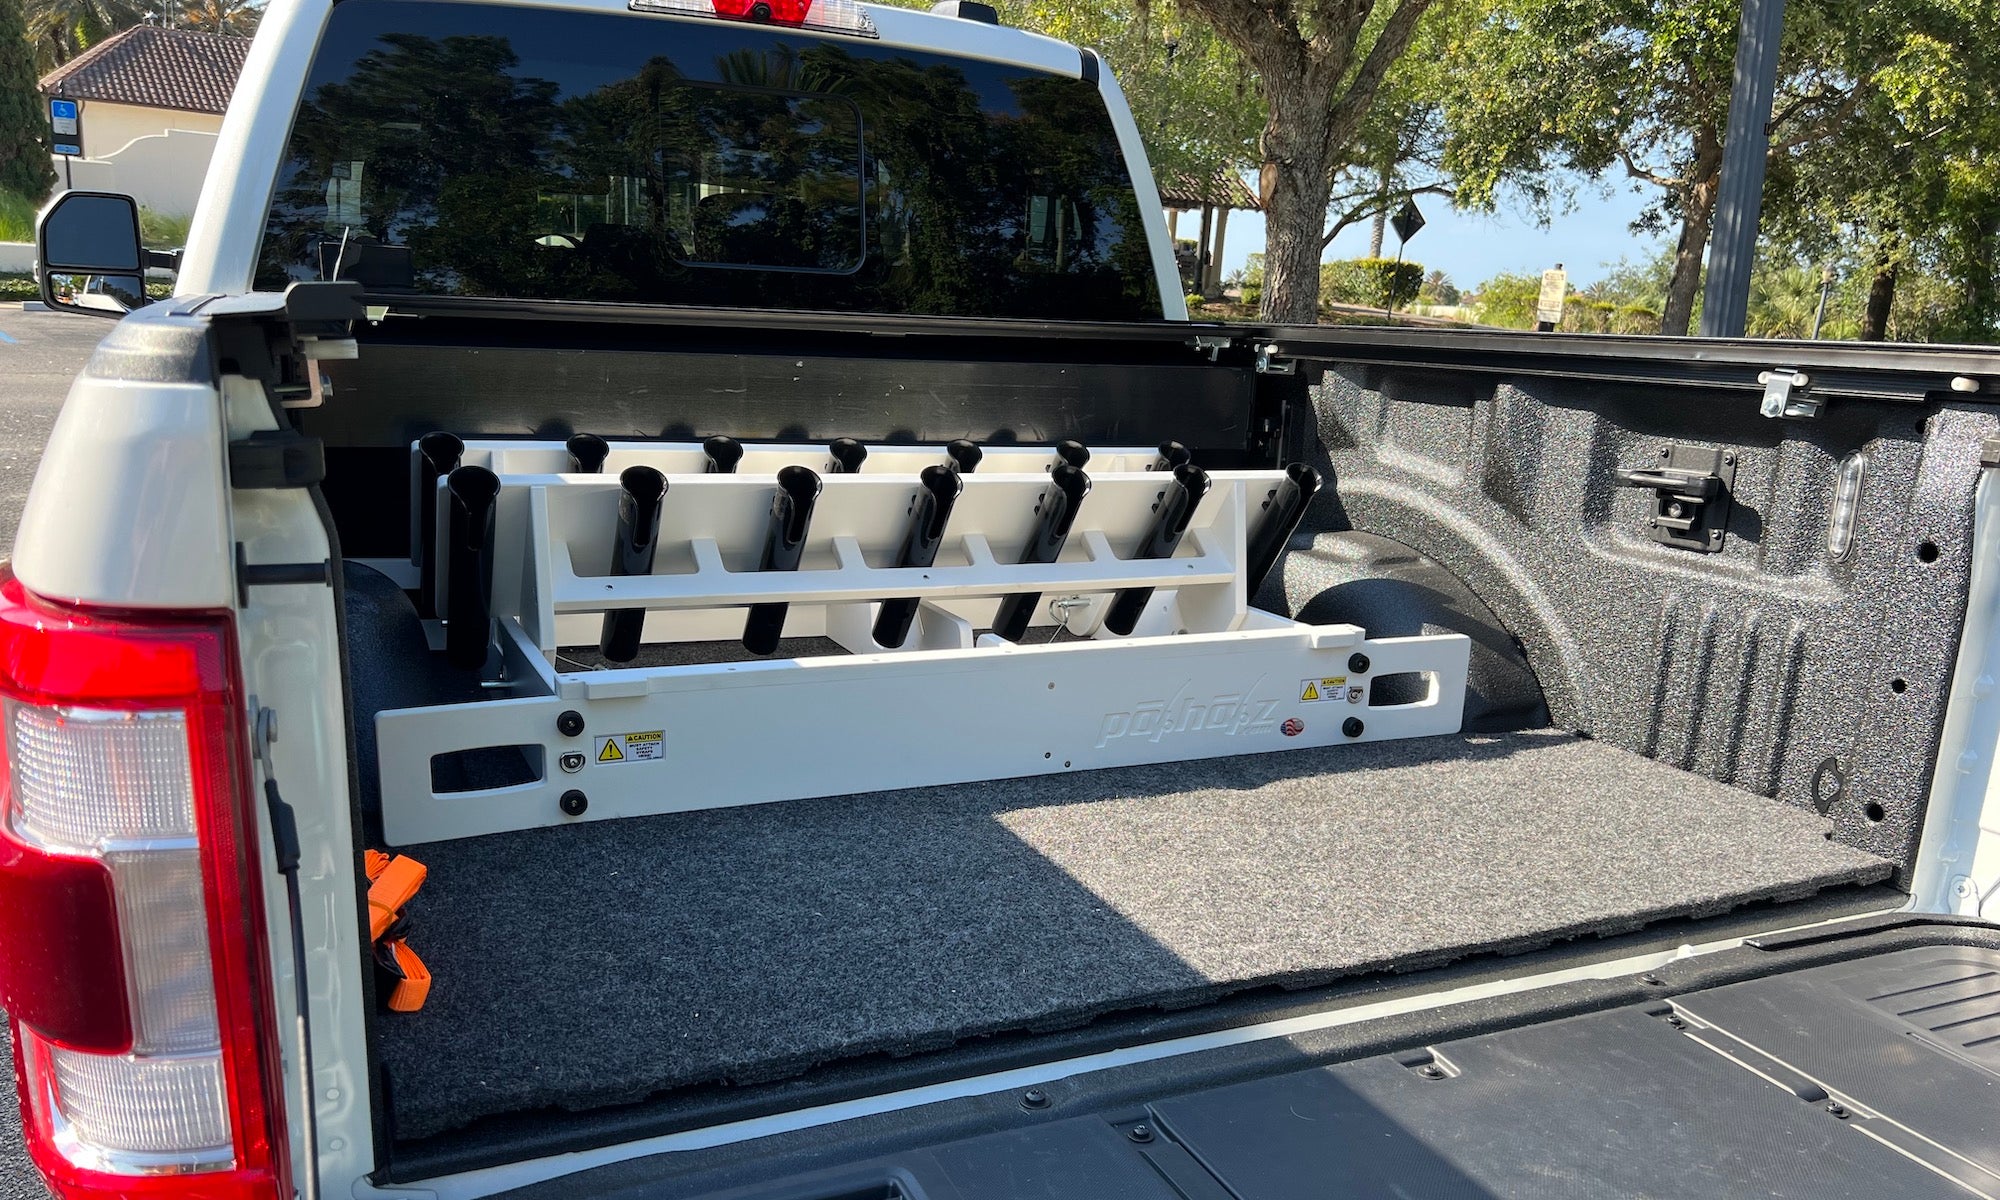 Truck Bed Pole Holders and More! – POLHOLZ